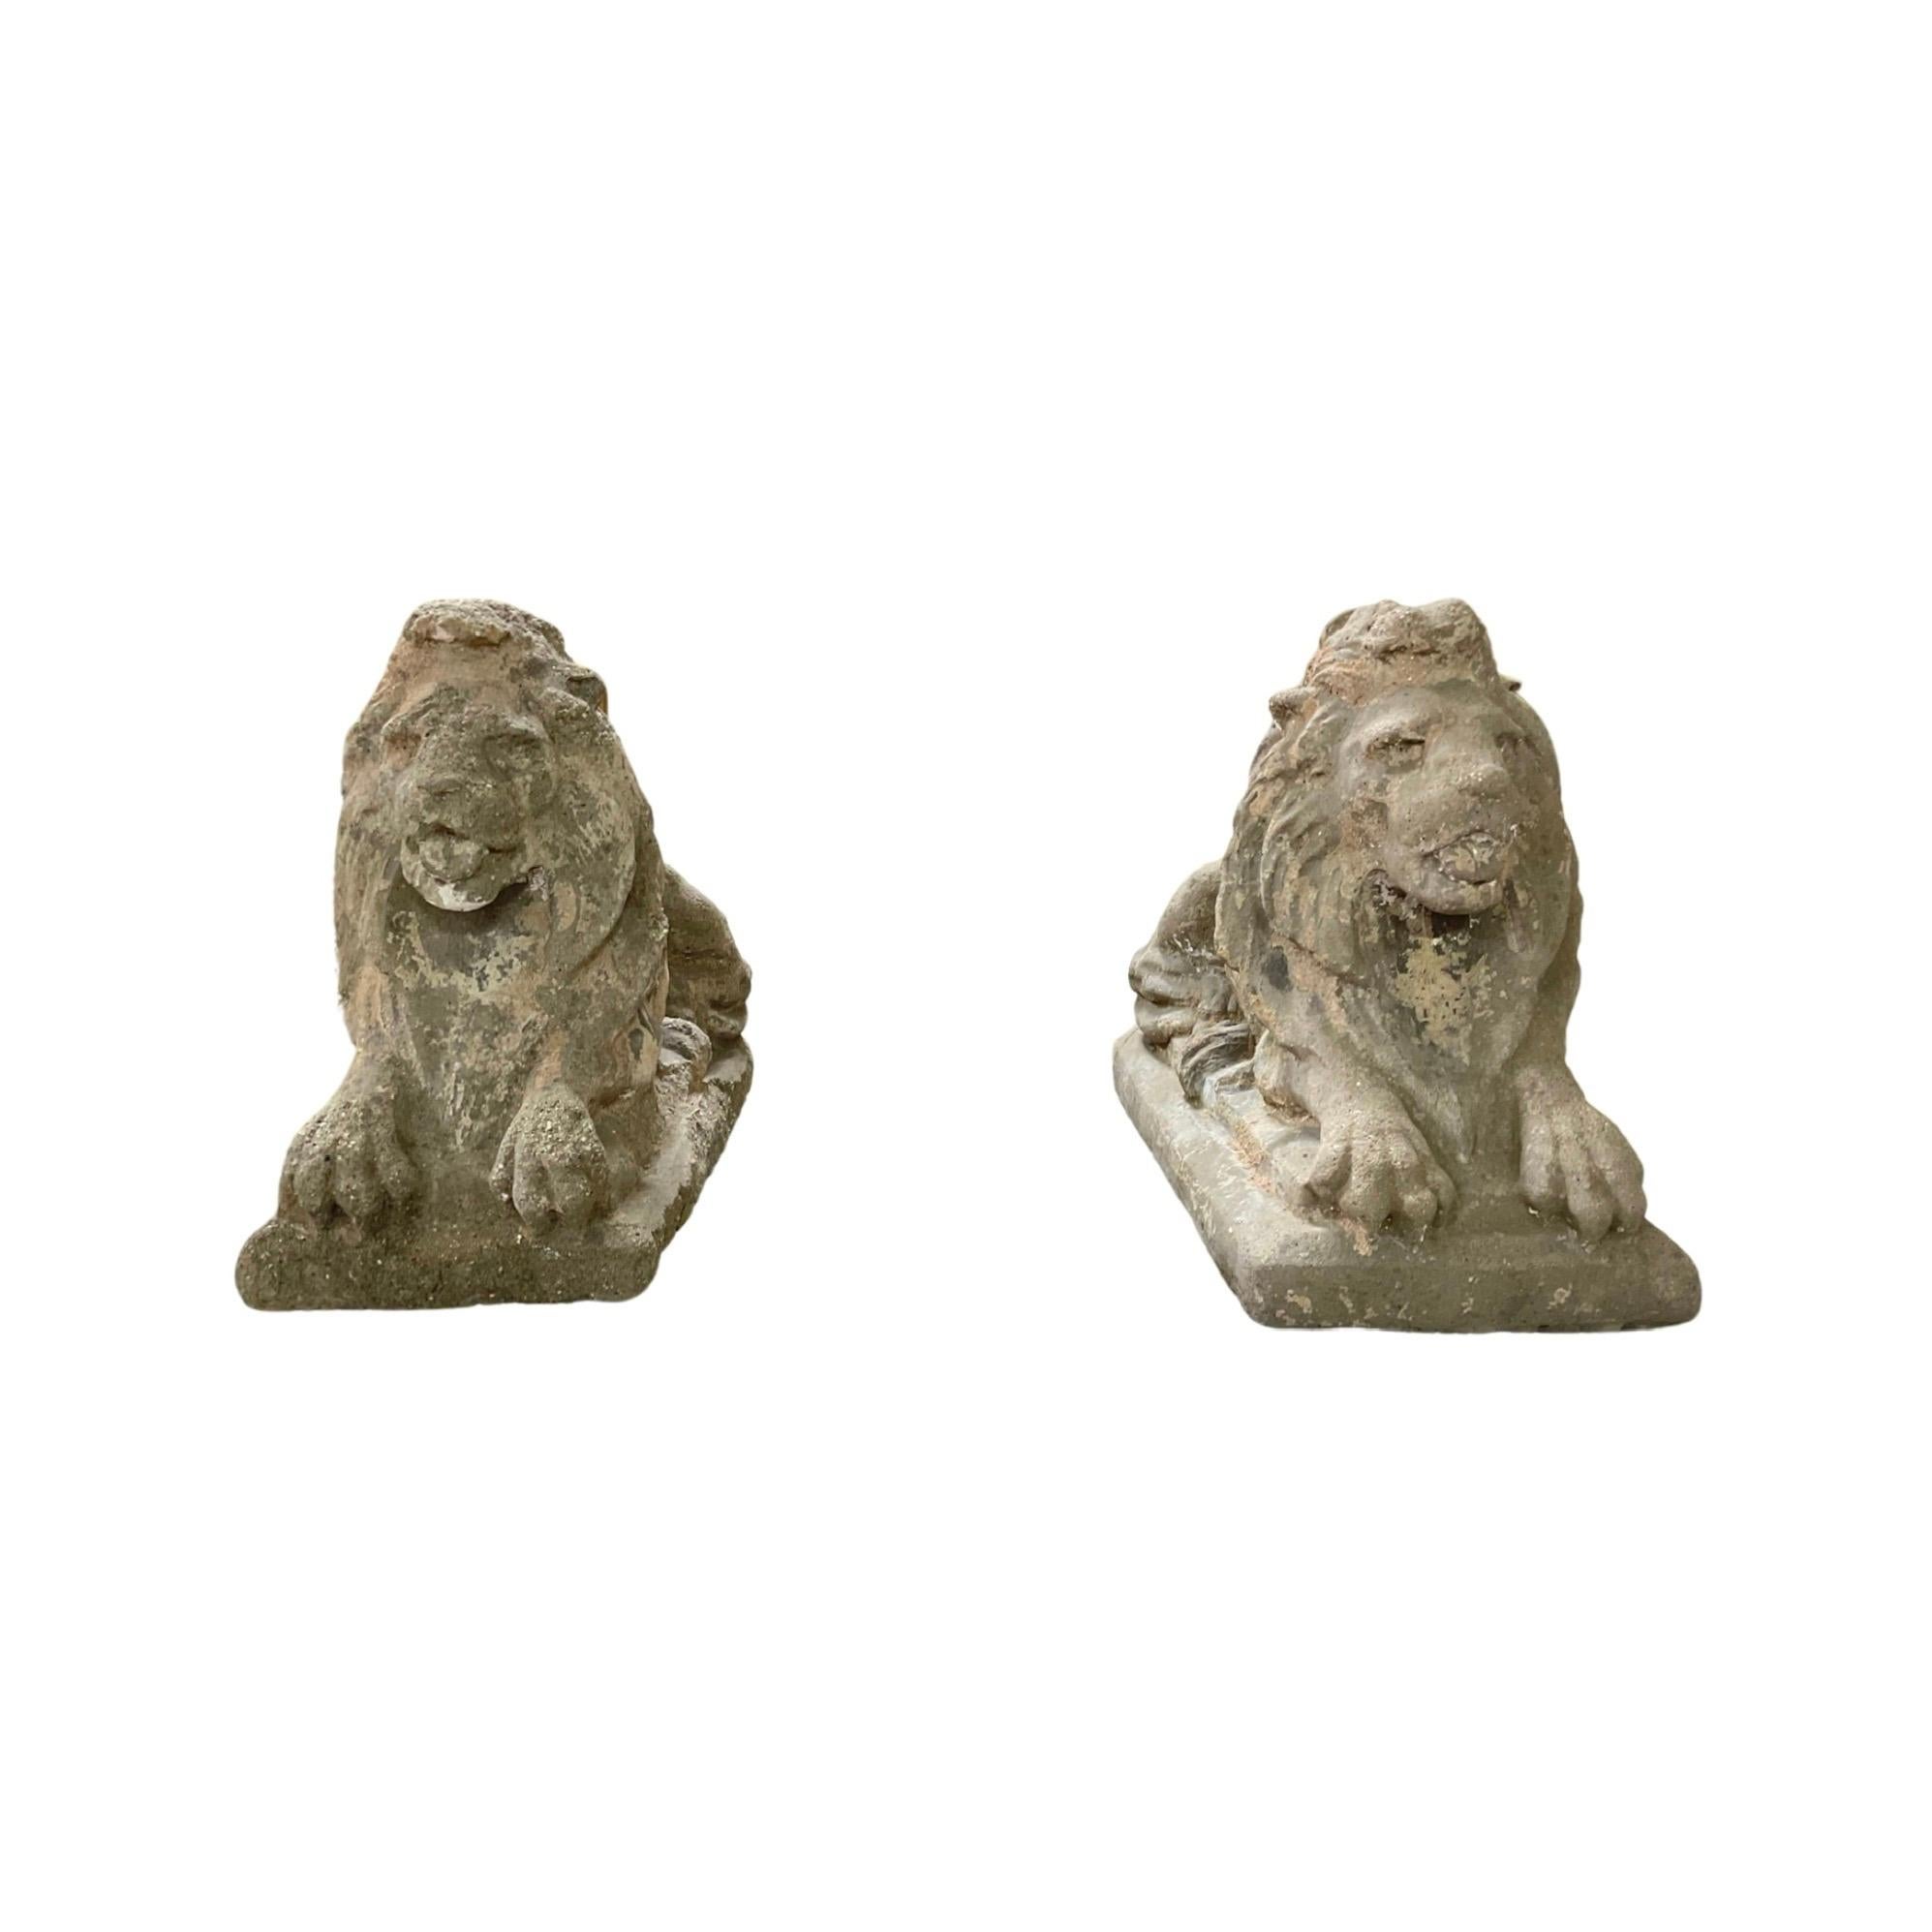 These French Stone Composite Lion Sculptures from the 1910s are a unique and stunning addition to any home or garden. Crafted from a combination of stone and composite materials, these sculptures will stand the test of time. Available as a pair,